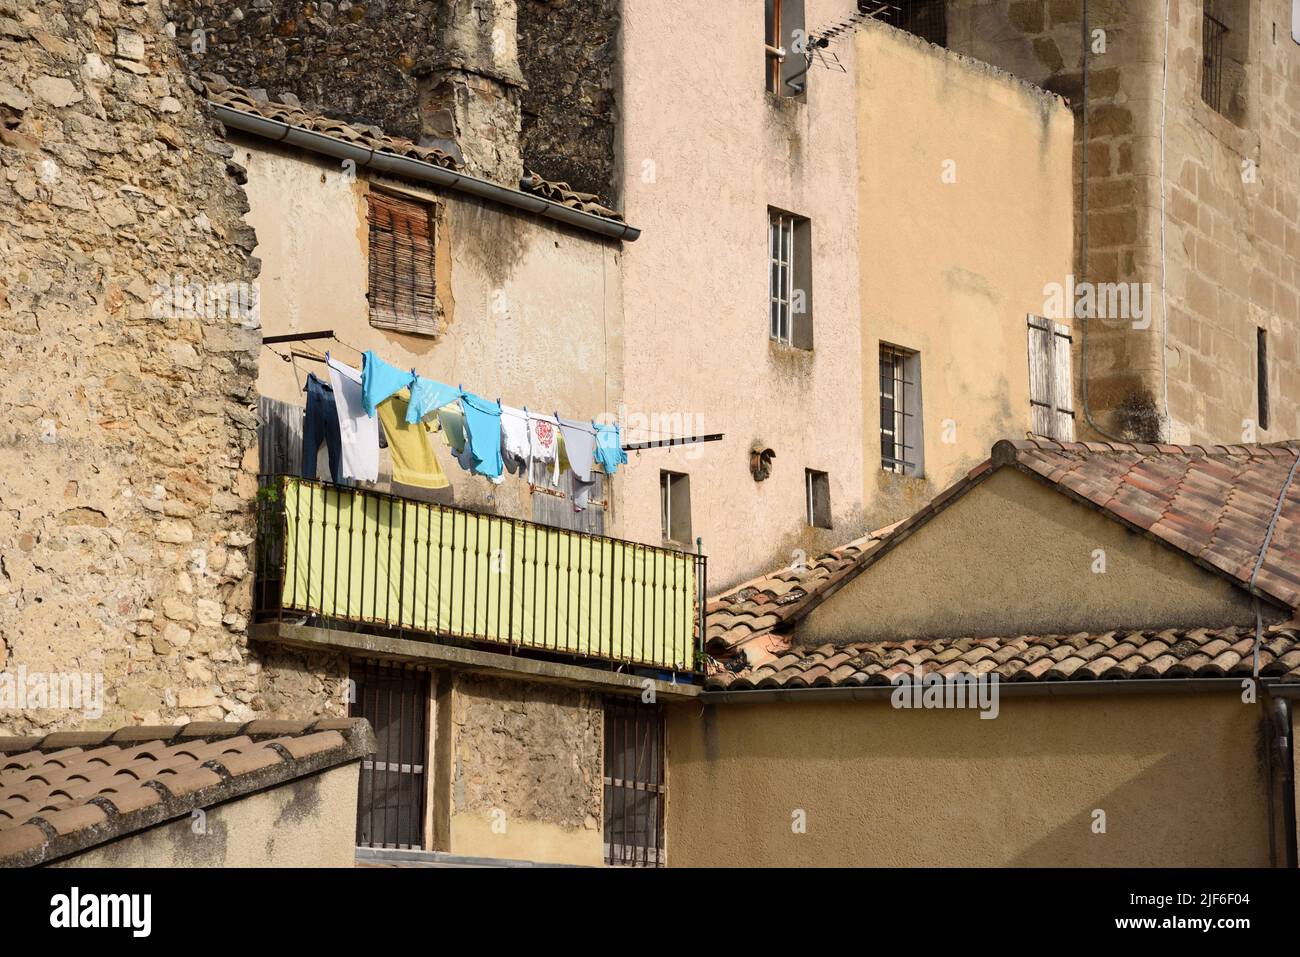 Laundry or Washing Drying on Washing Line or Clothes Line on Balcony in the Old Town or Historic District Nyons Drôme Provence France Stock Photo